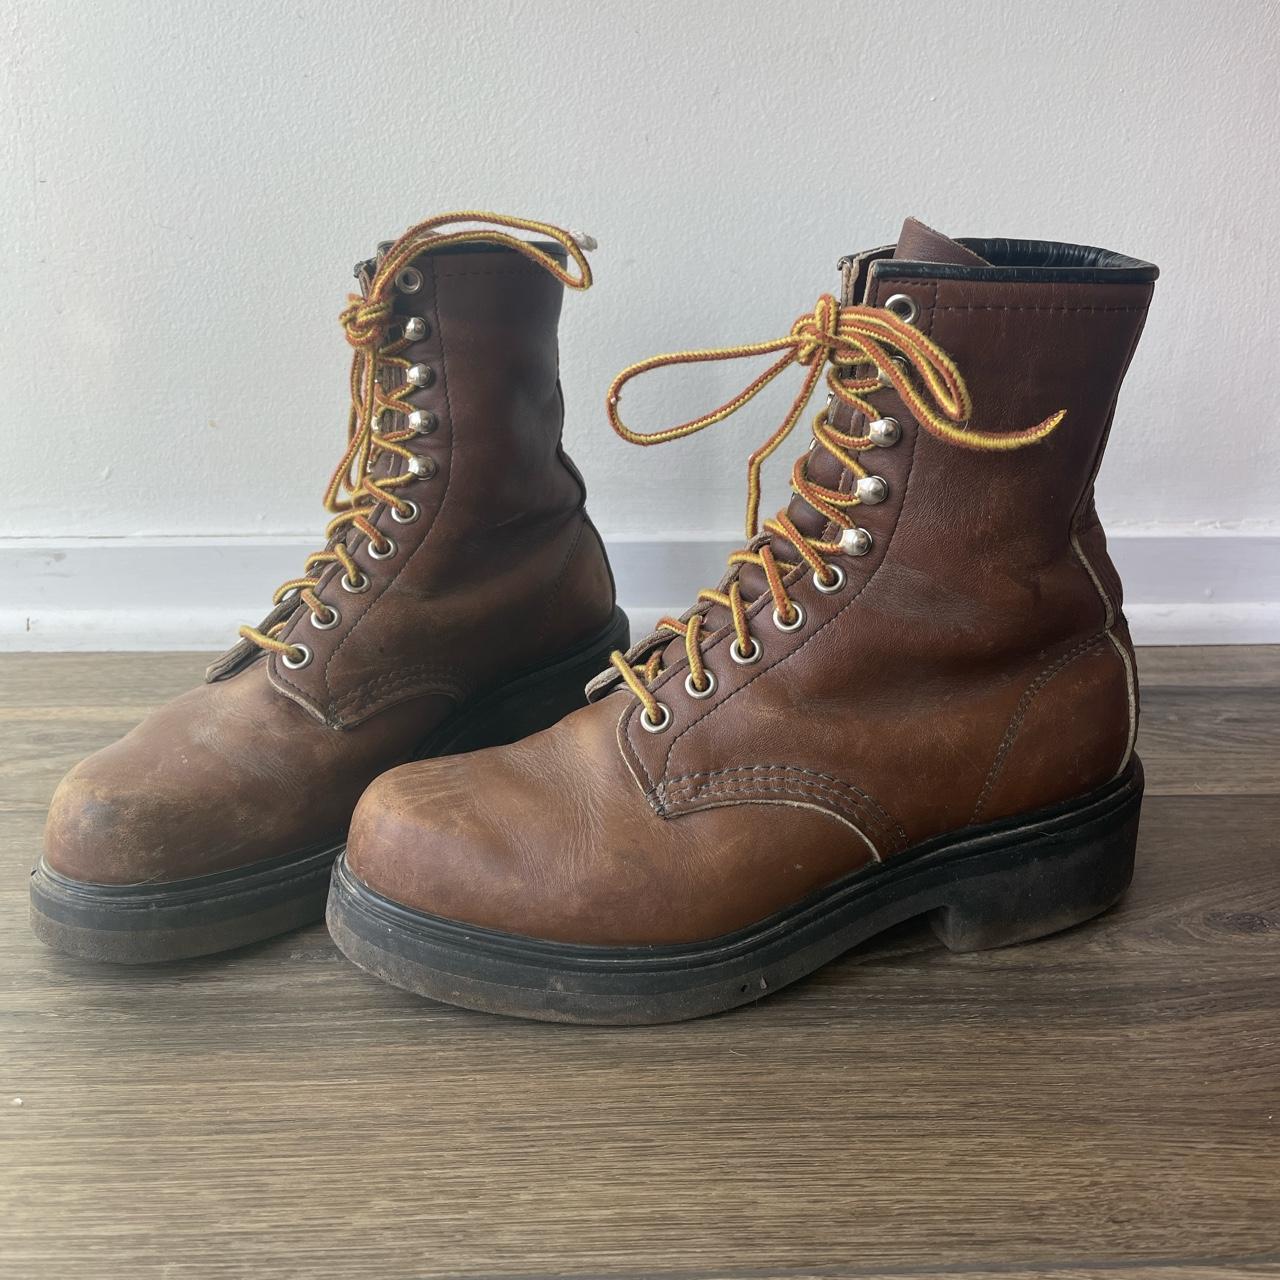 Redwing Women's Burgundy and Brown Boots | Depop